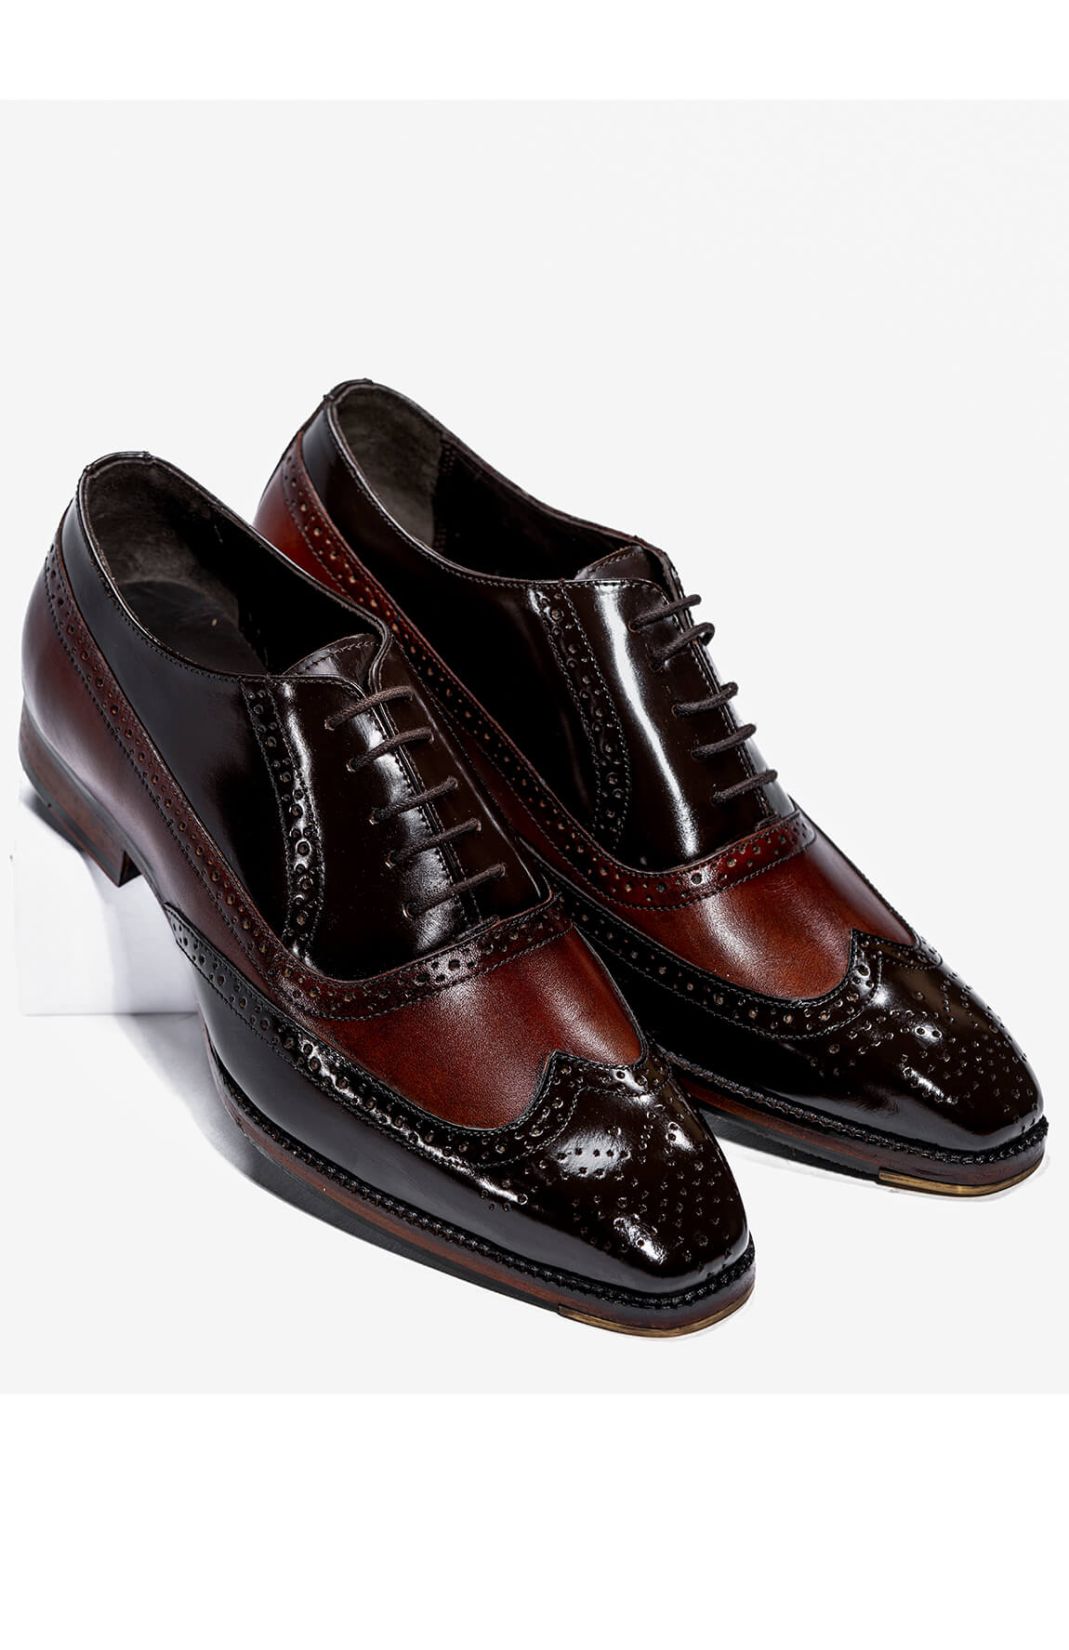 Longwing Brogue Lace-Up Shoes